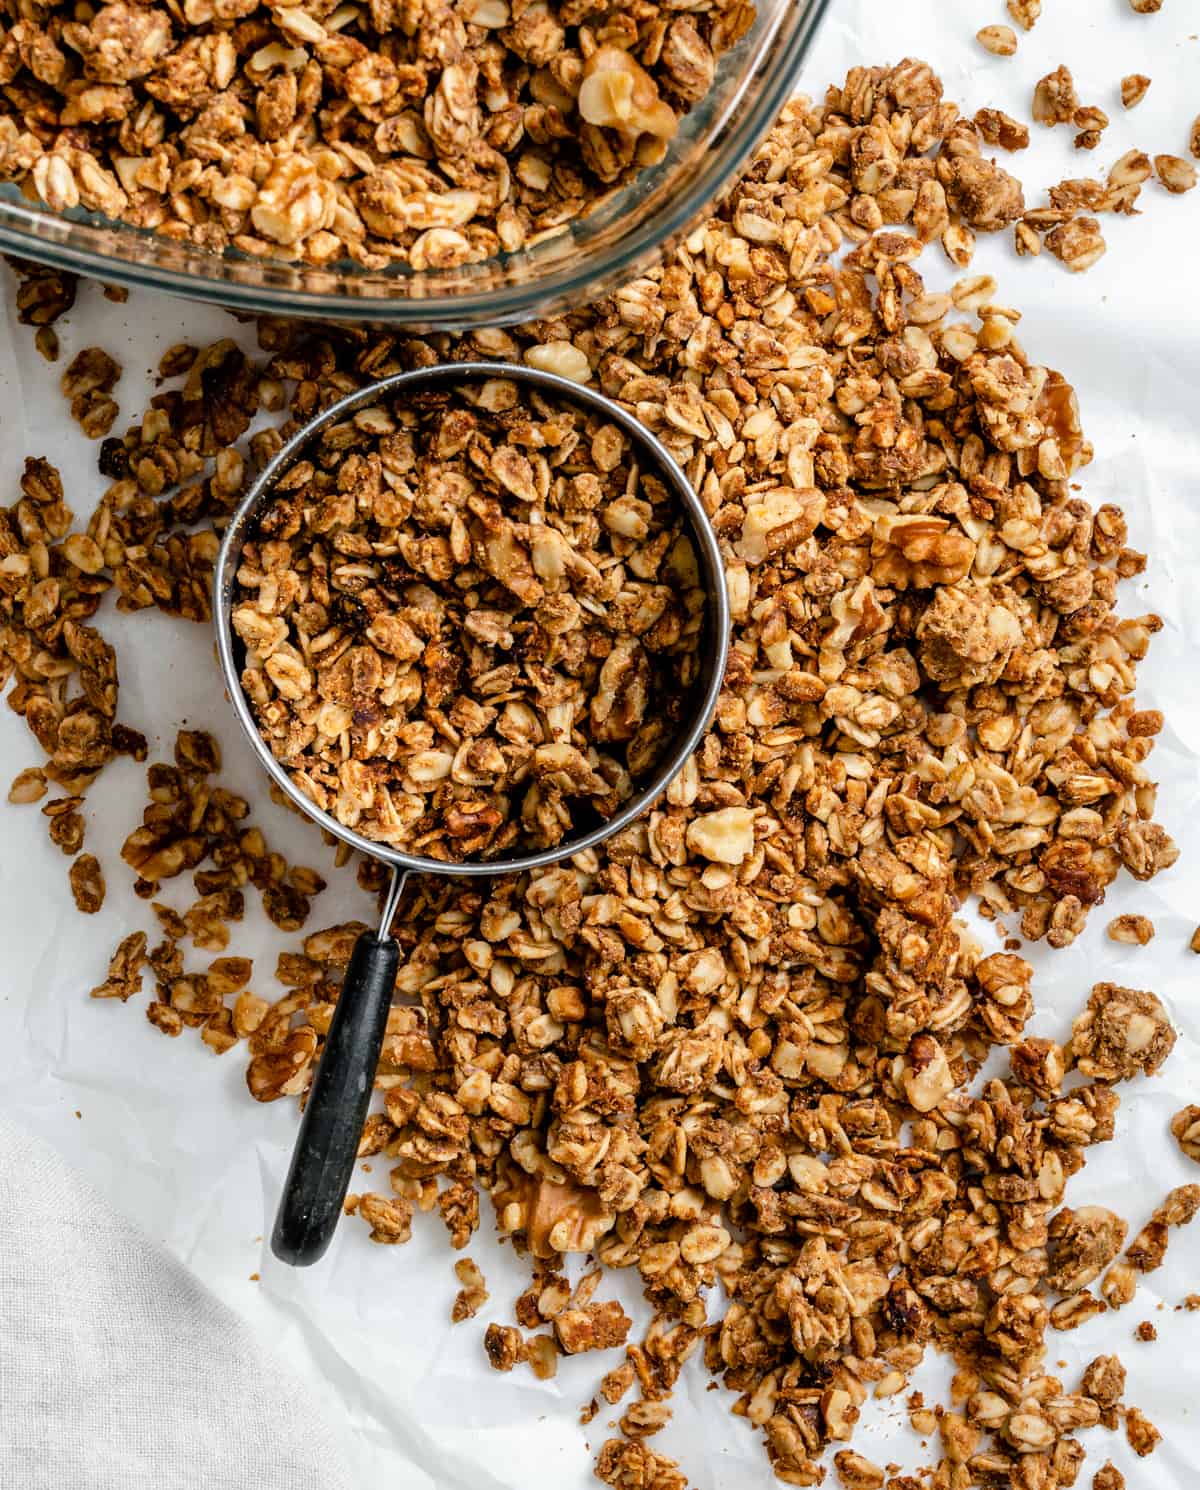 completed Easy Peanut Butter Granola against a white background